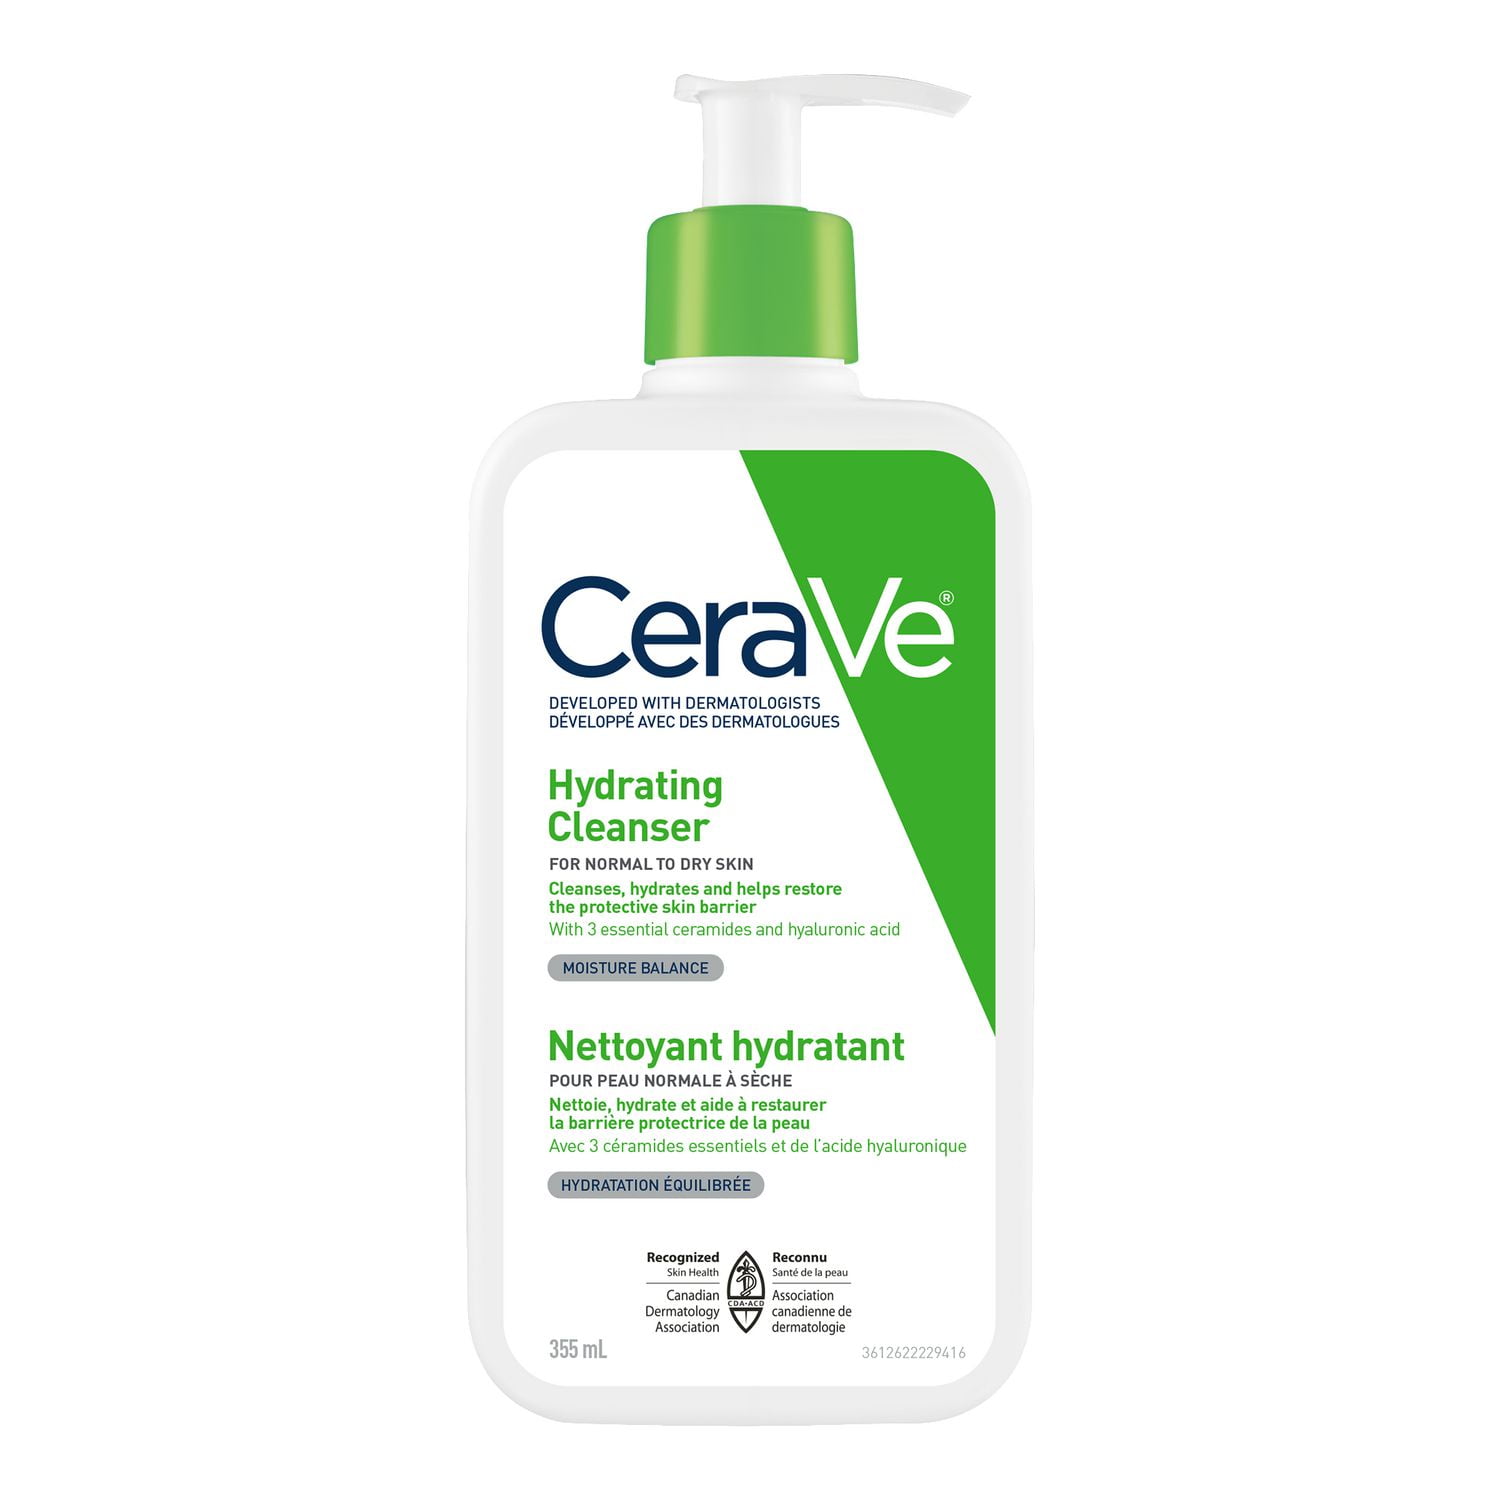 Fragrance-free Gentle Hydrating Facial Cleanser